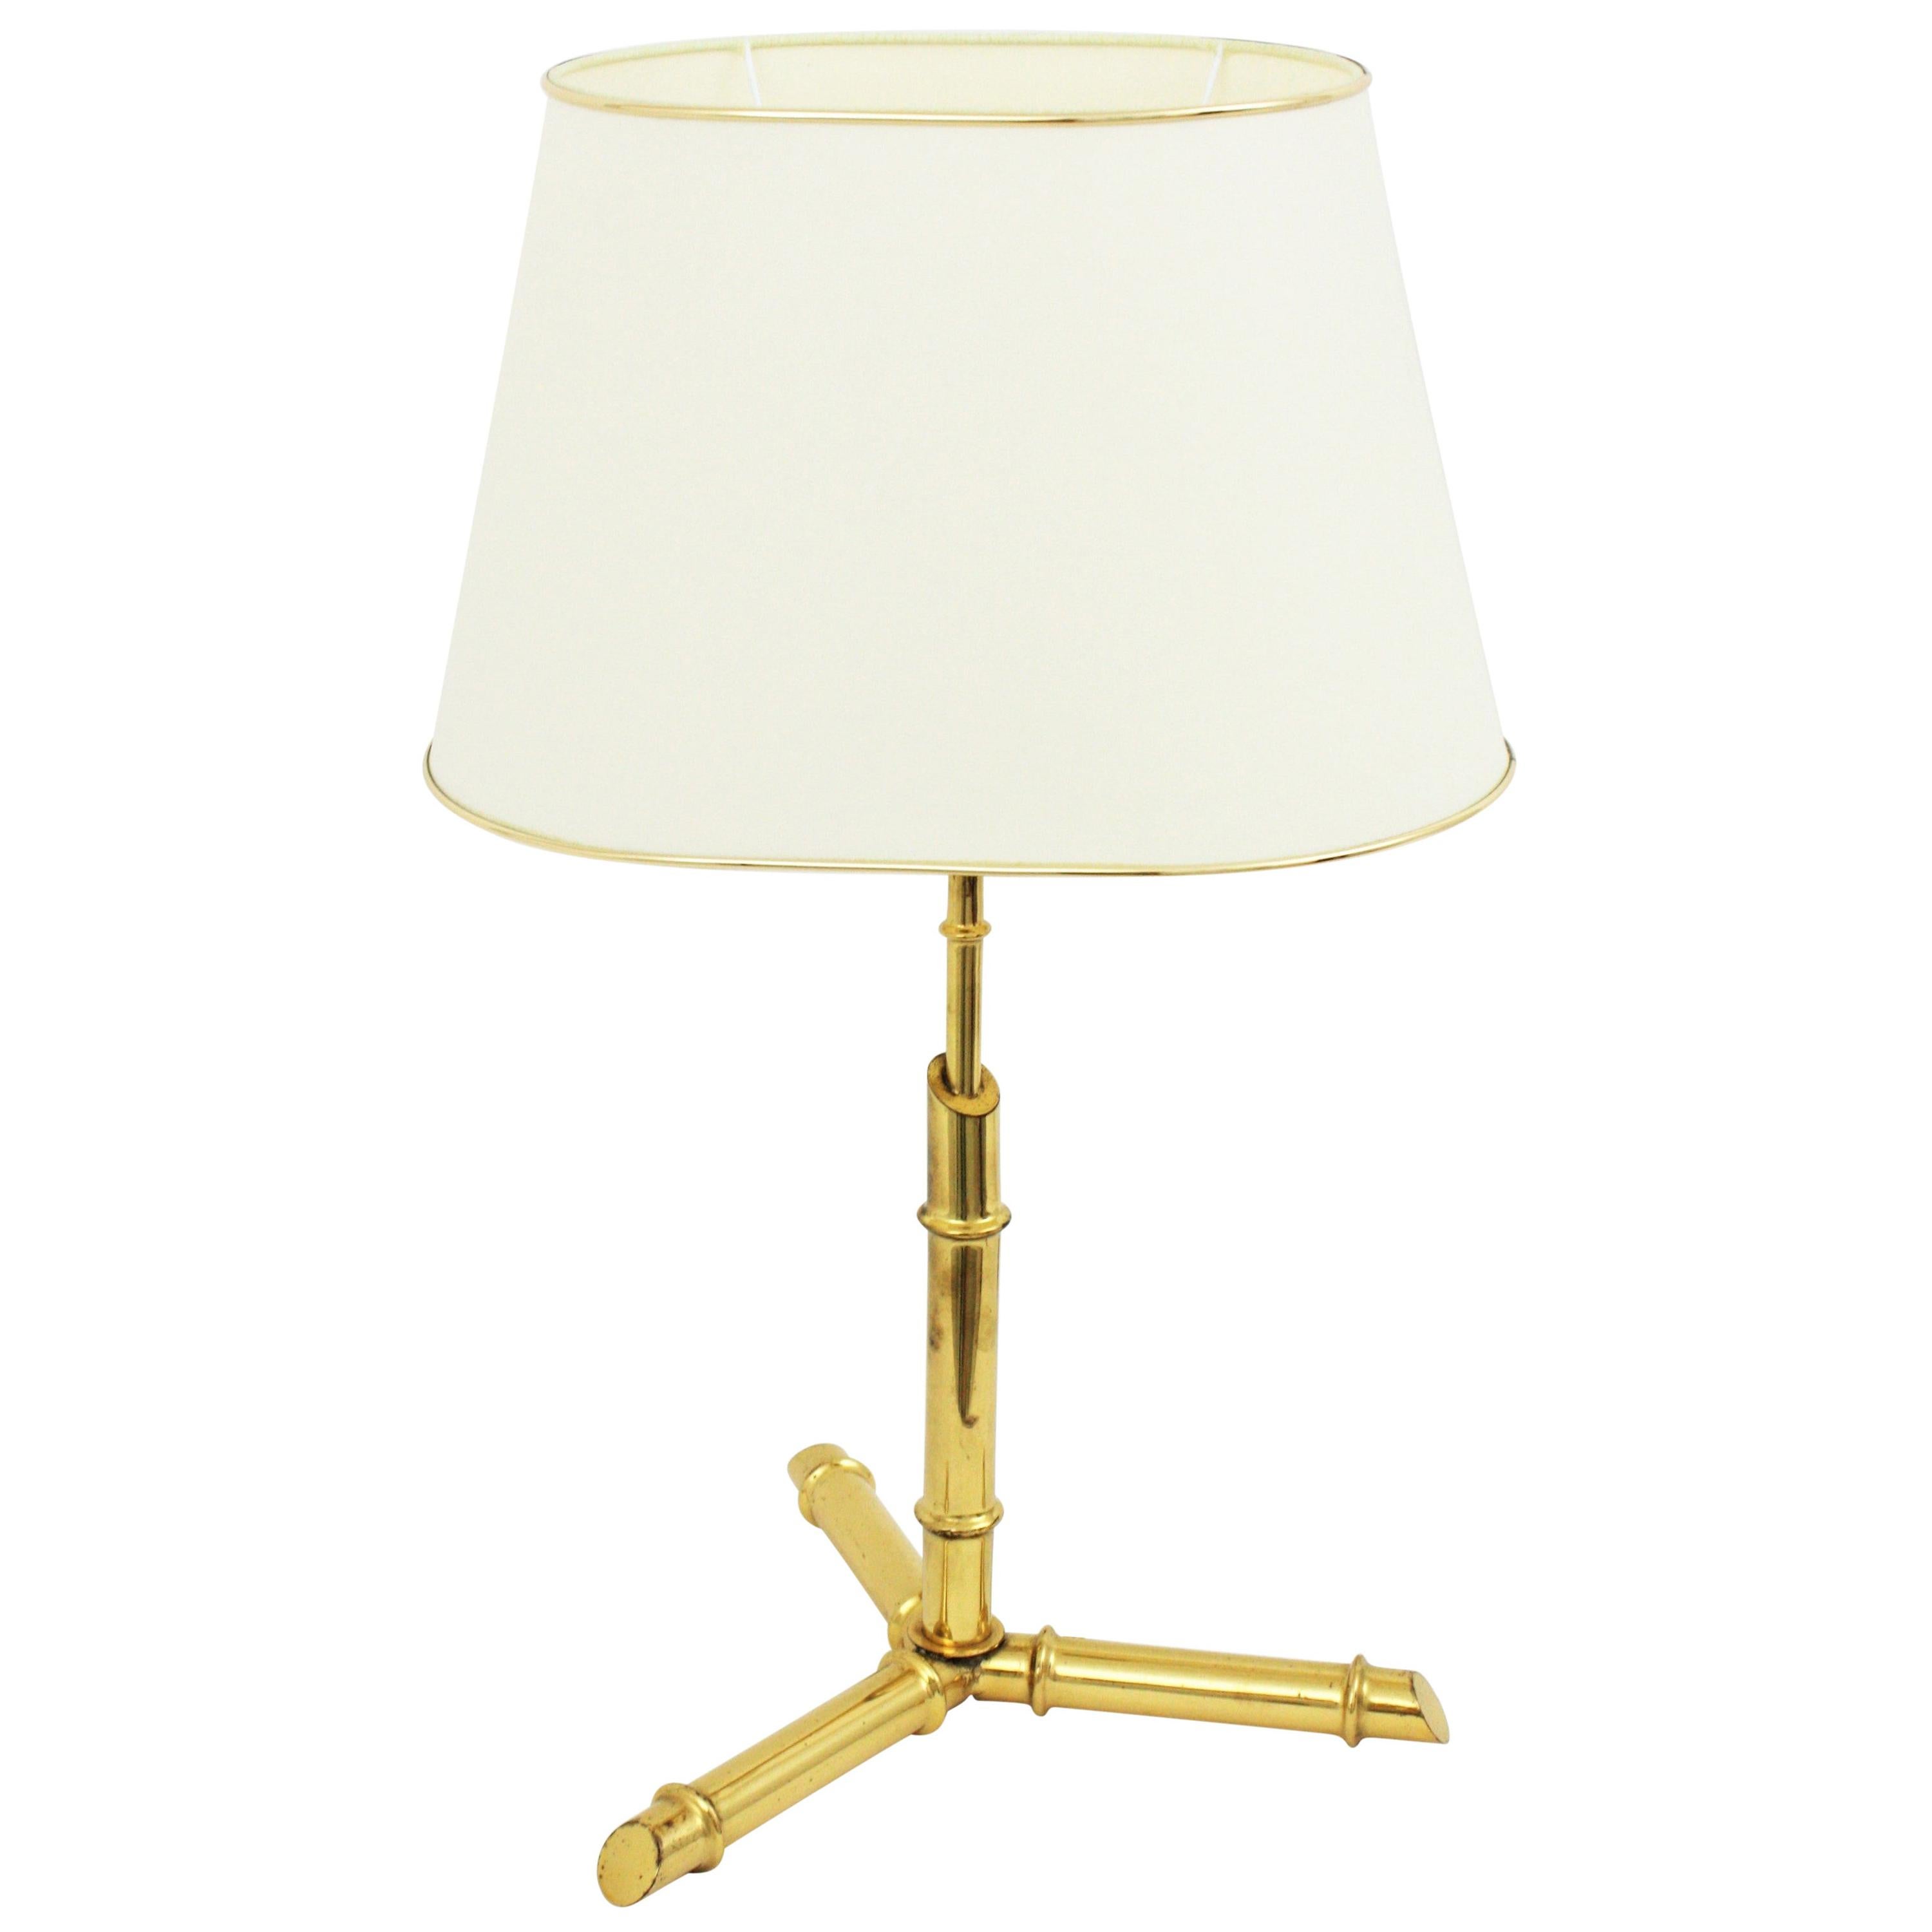 Brass faux bamboo table lamp with cream color shade, Italy, 1950s.
Lampshade is included.
Measures: 42 cm H x 30 cm W x 28 cm D
Overall measures with lampshade: 58 cm H x 36 cm W x 27 cm D.